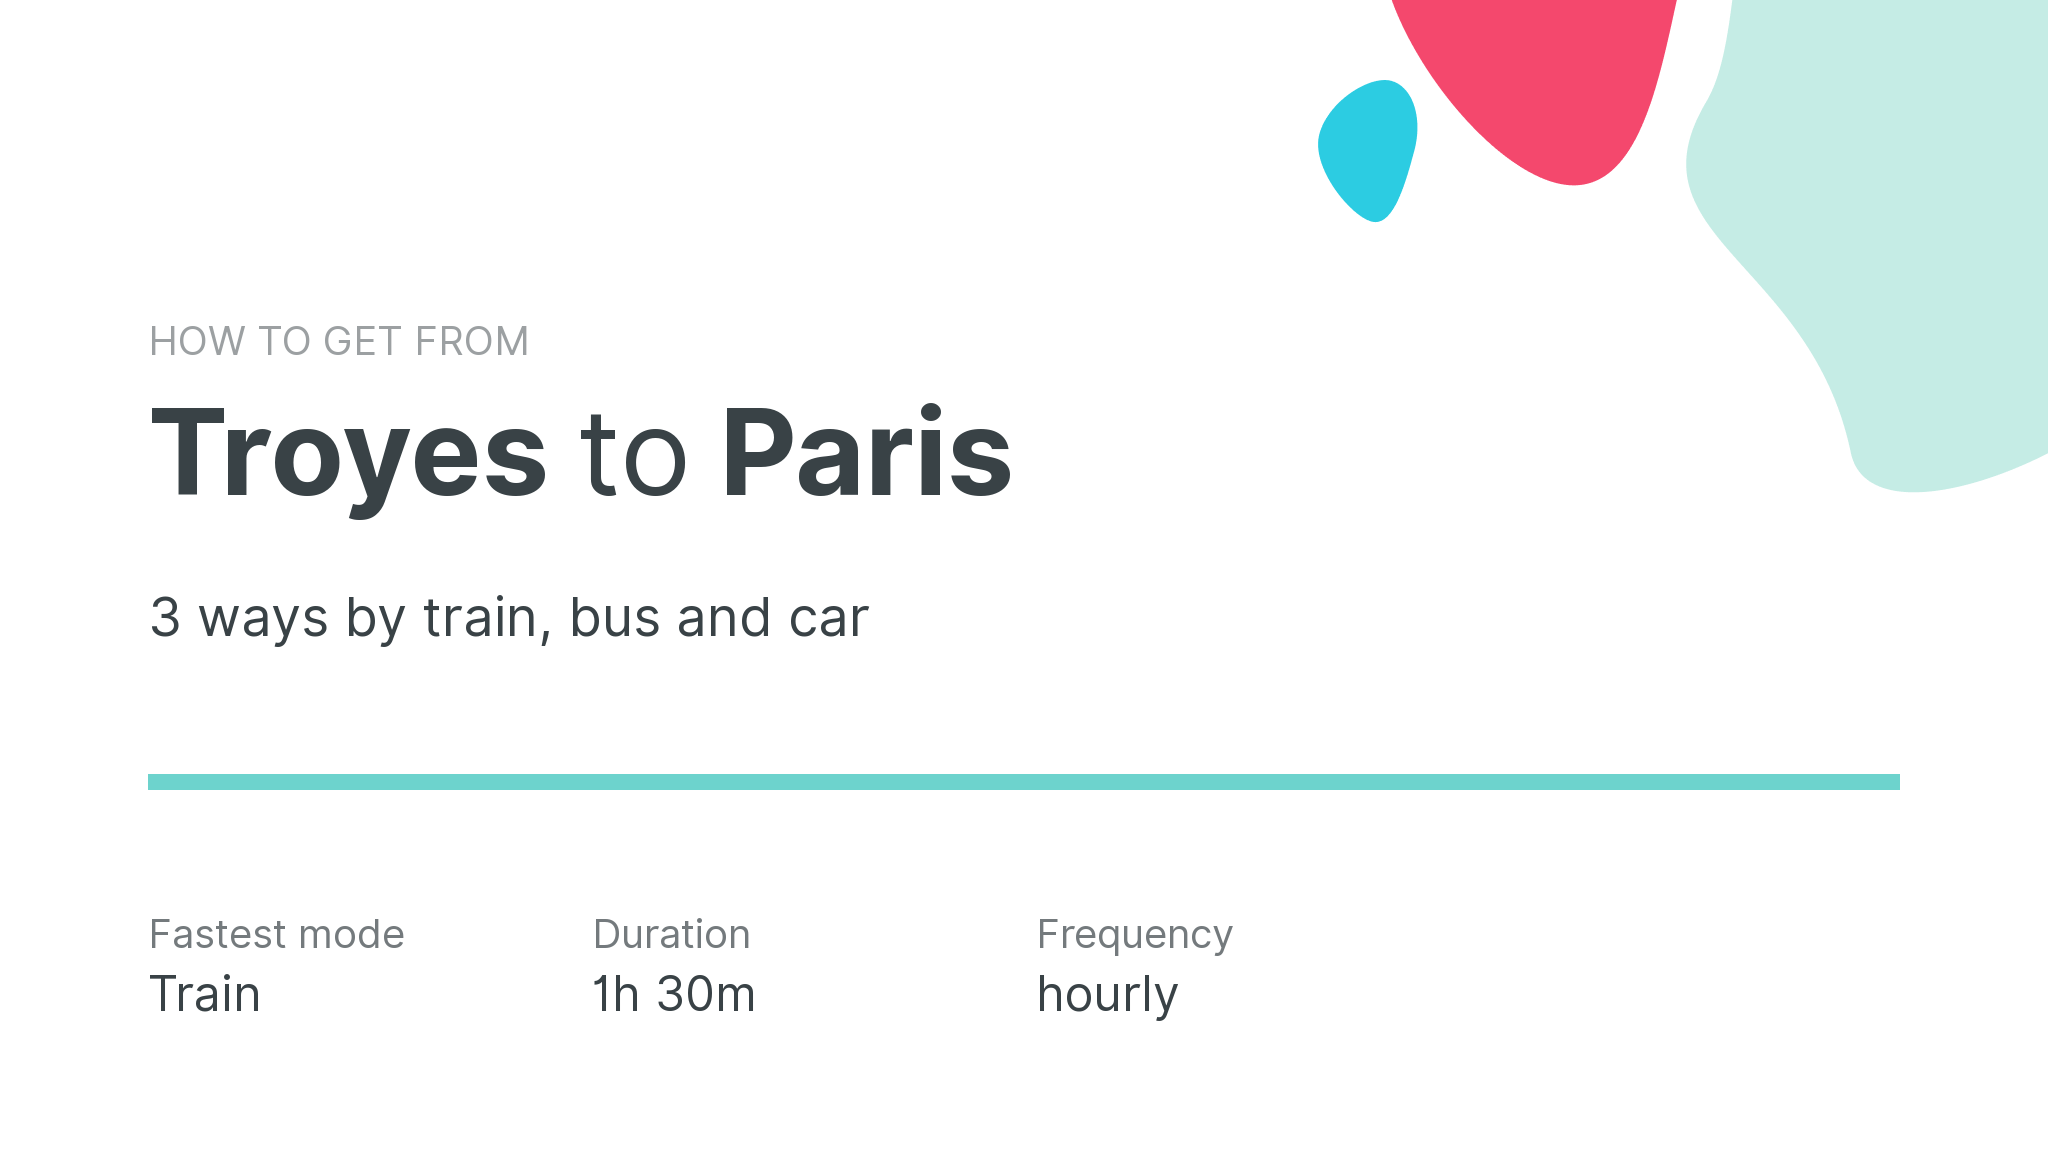 How do I get from Troyes to Paris